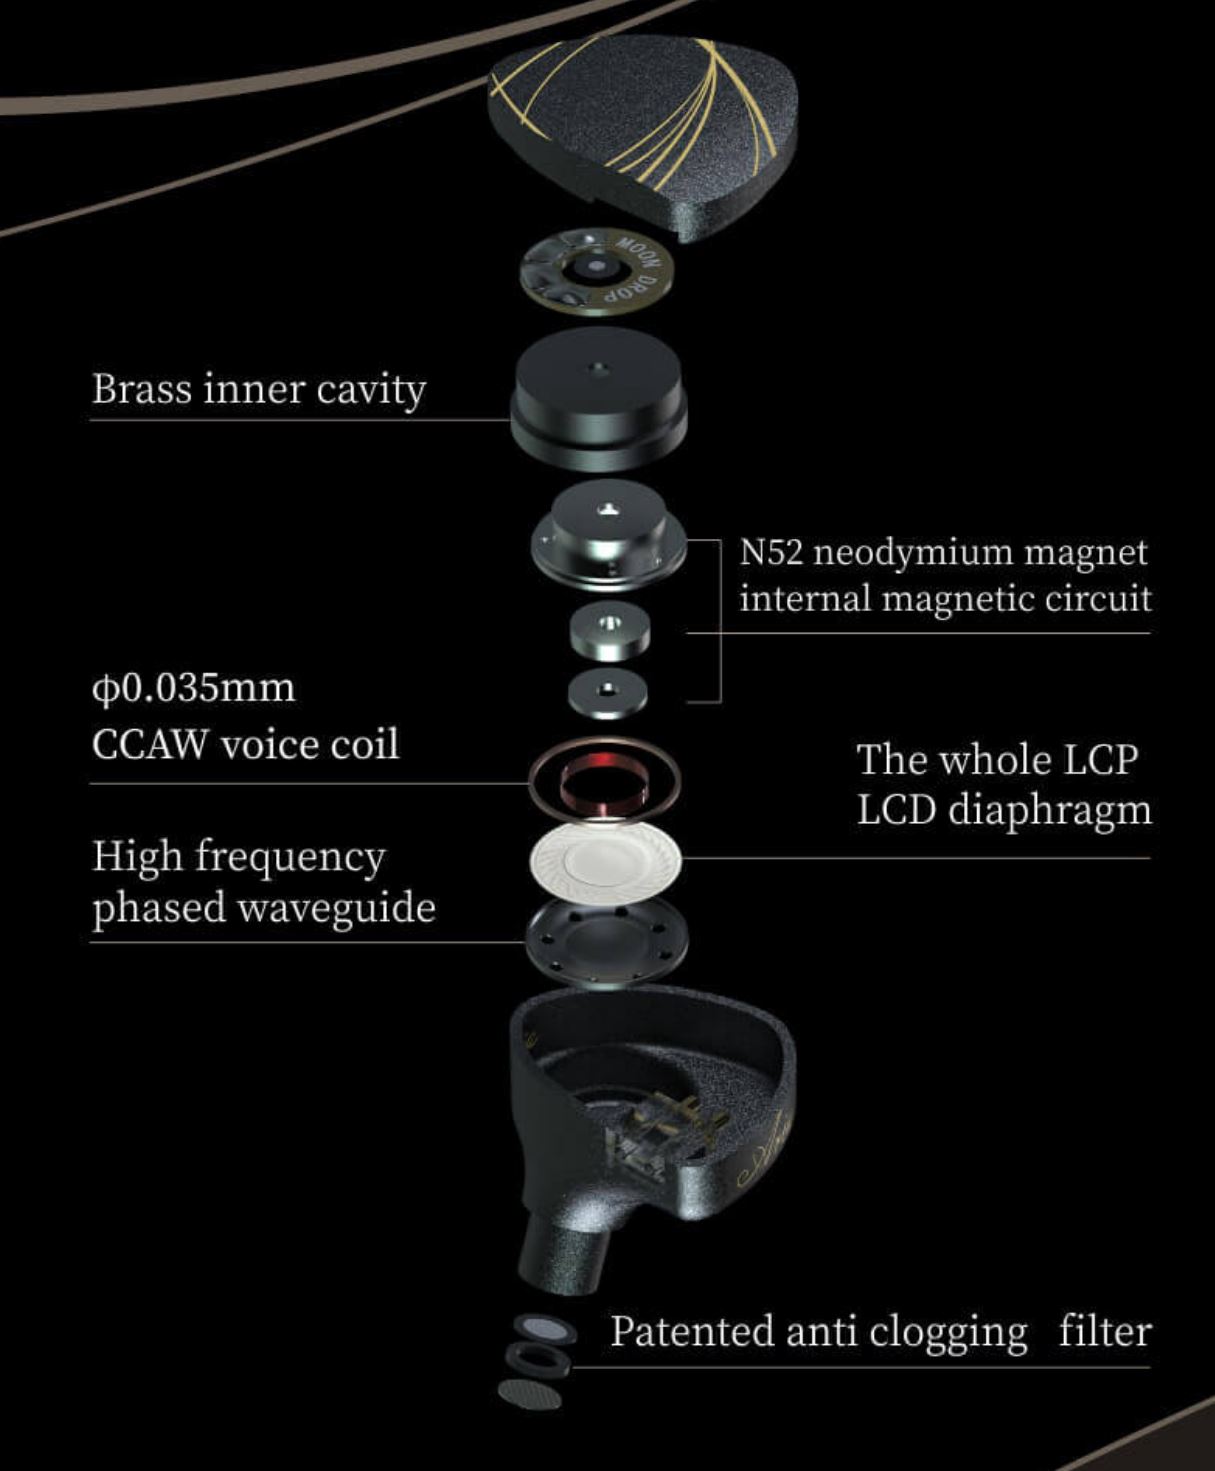 https://www.techpowerup.com/review/moondrop-aria-2021-in-ear-monitors/images/driver.jpg